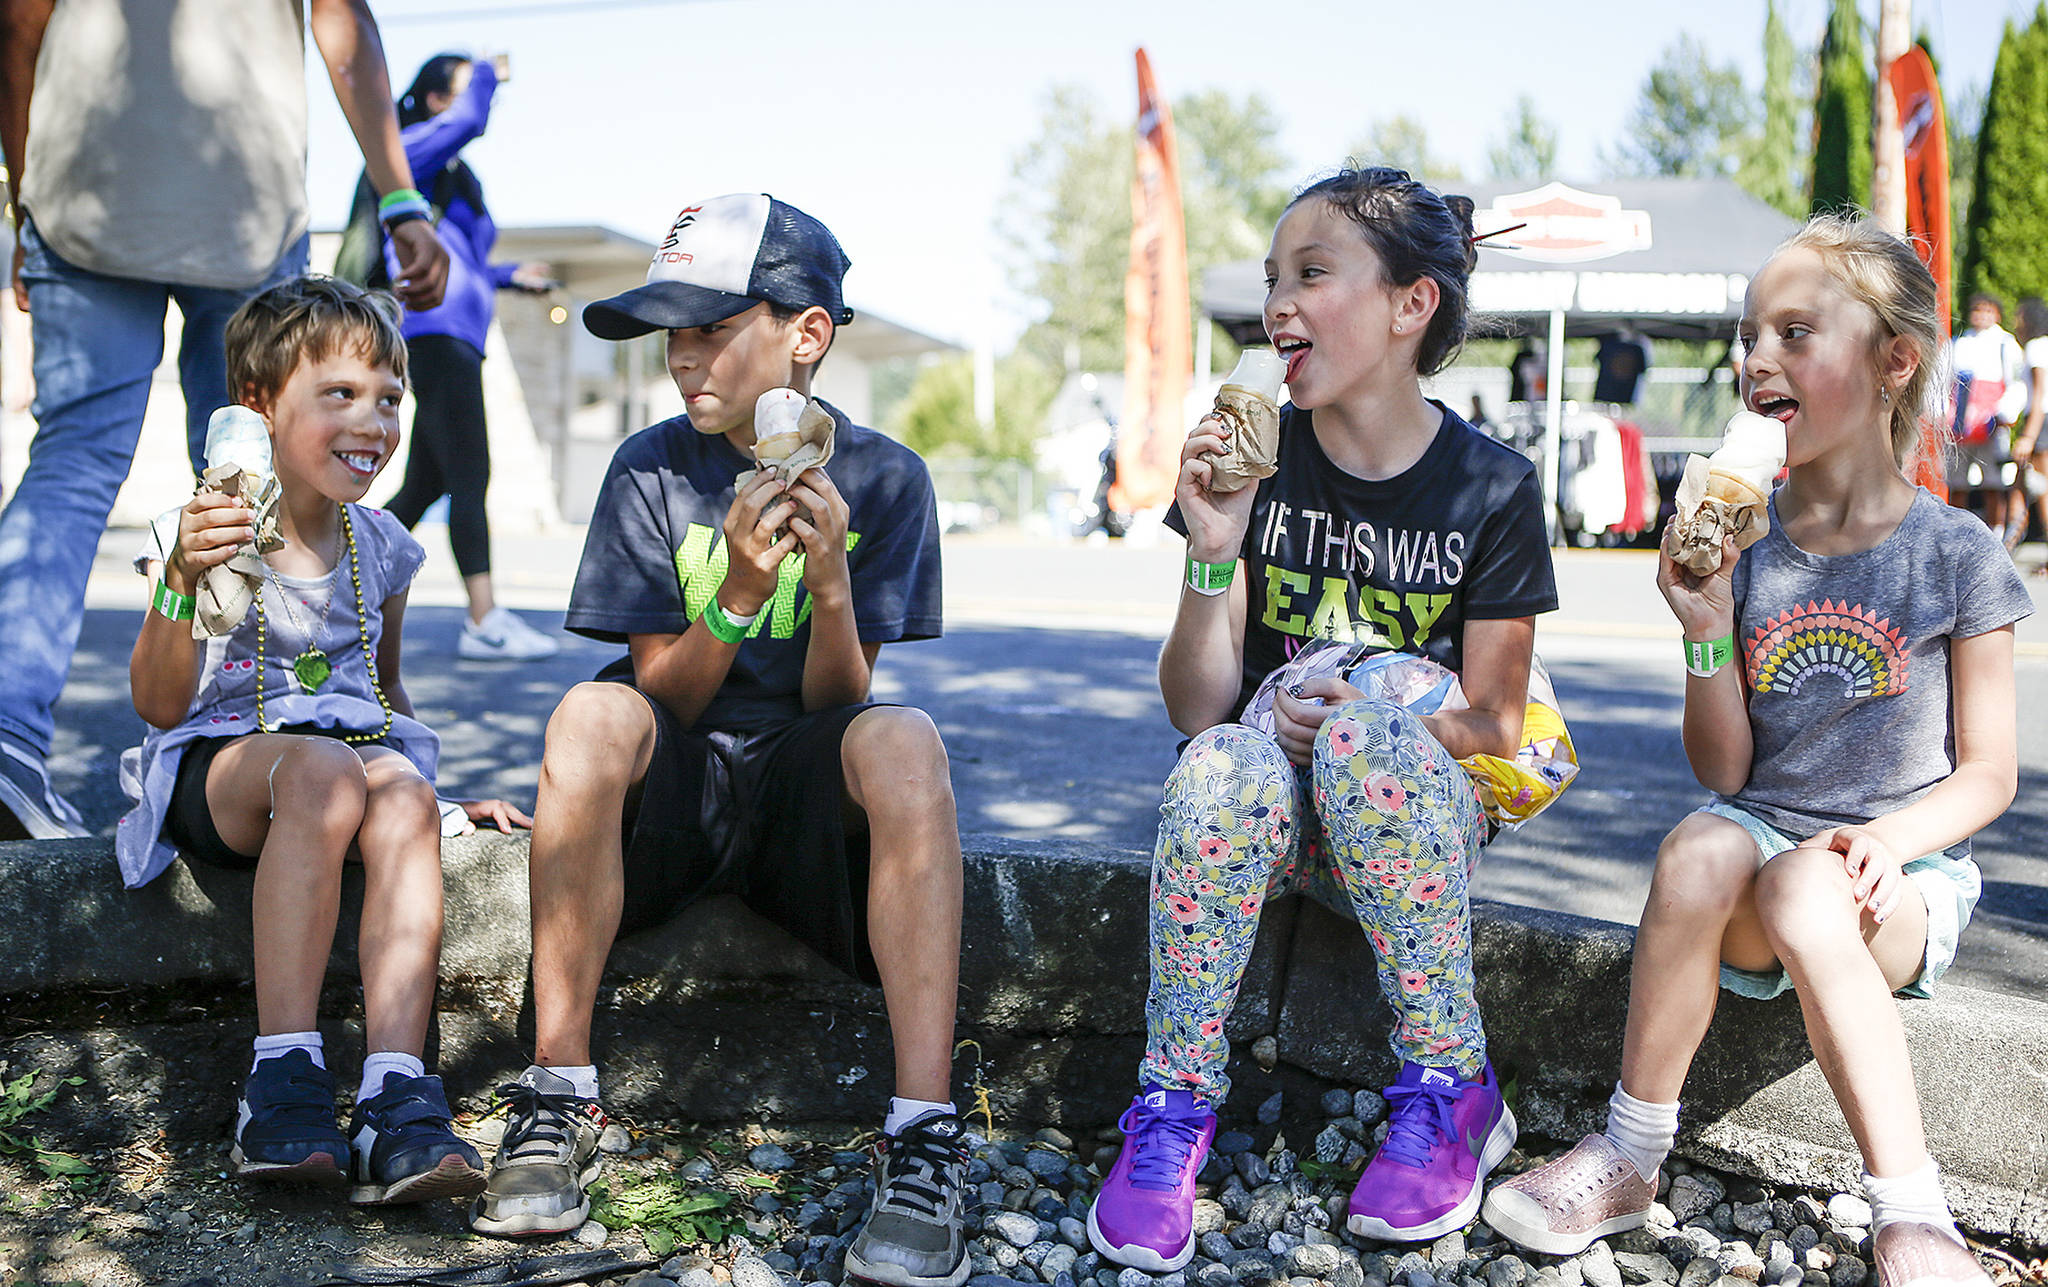 Korbehn Kahm (left), 5, takes a gulp of ice cream as Cedric Sterett (center left), 9, Mya Sterett (center right), 11, and Eevea Kahm, 6, enjoy their own cones during the first day of Aquafest in downtown Lake Stevens on Friday. (Ian Terry / The Herald)